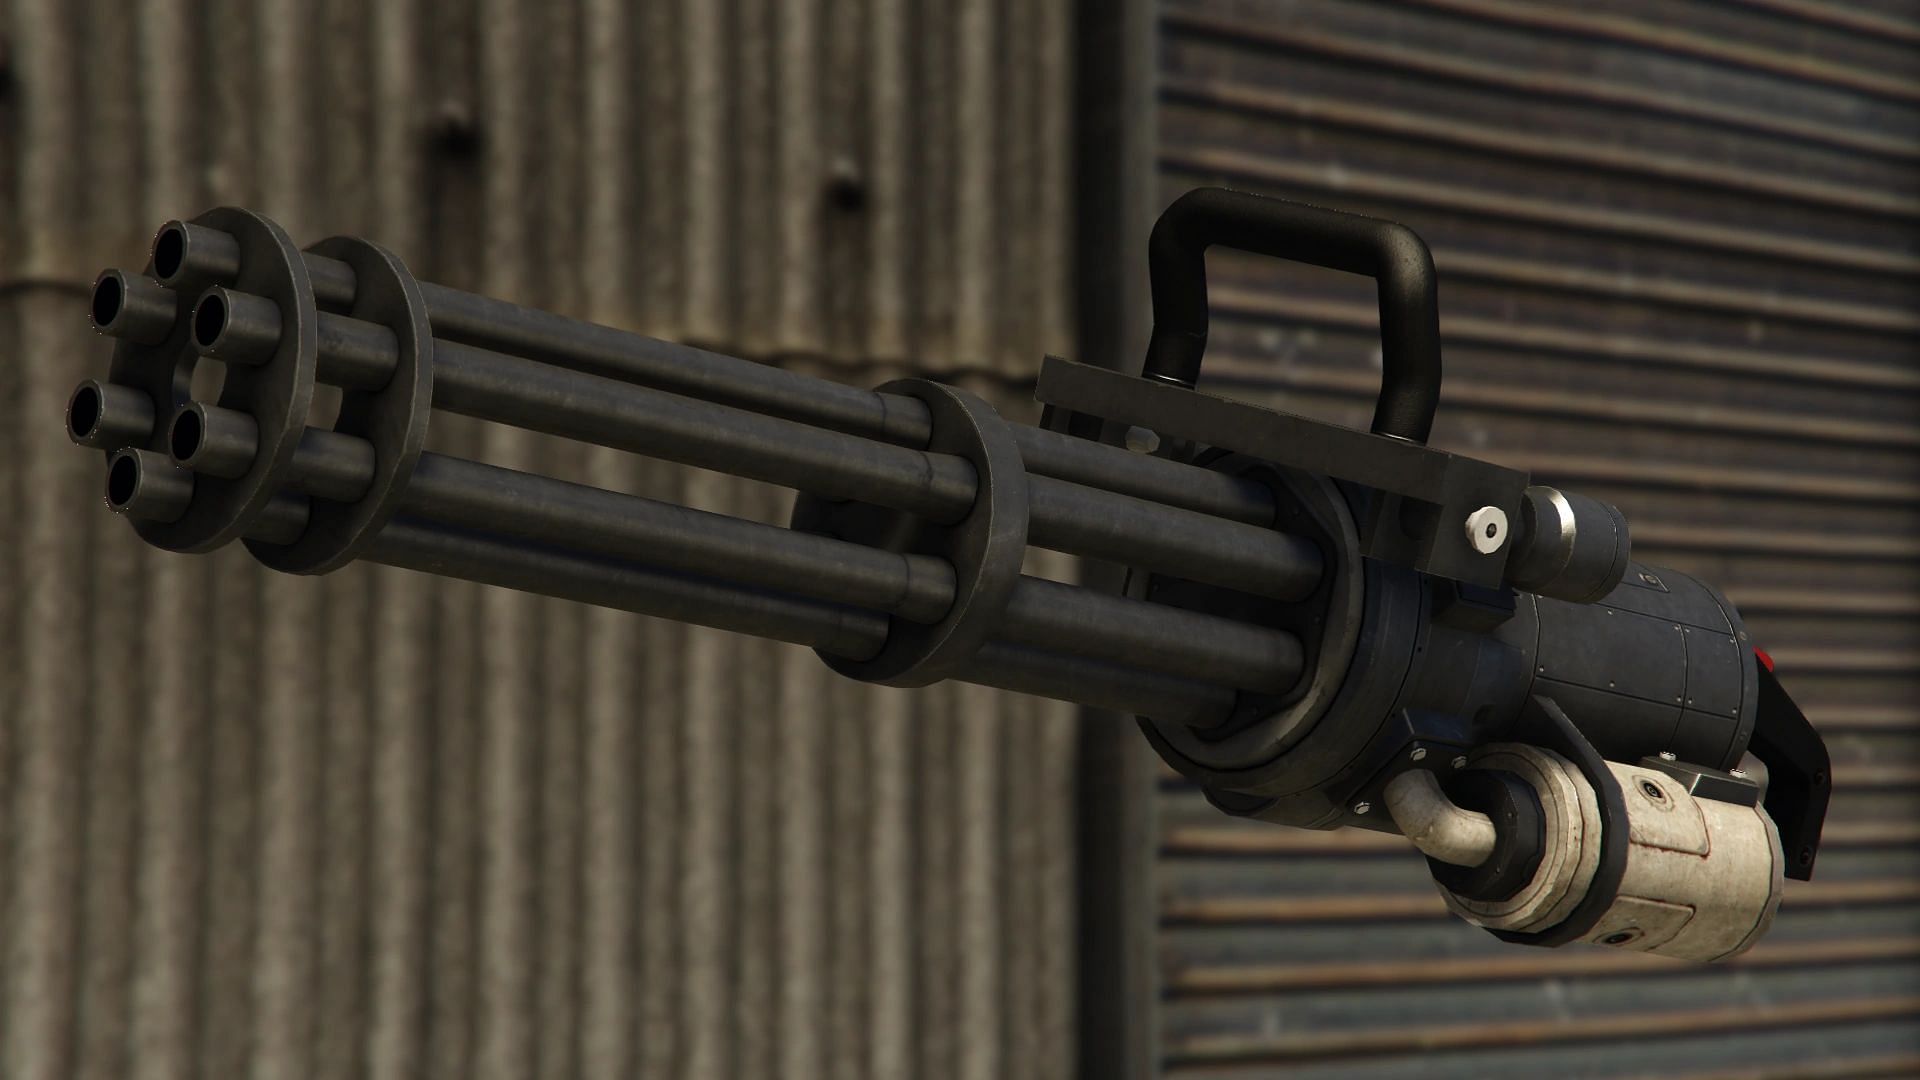 GTA games have some deadly weapons that players must have in their loadout. (Image via GTA Fandom)